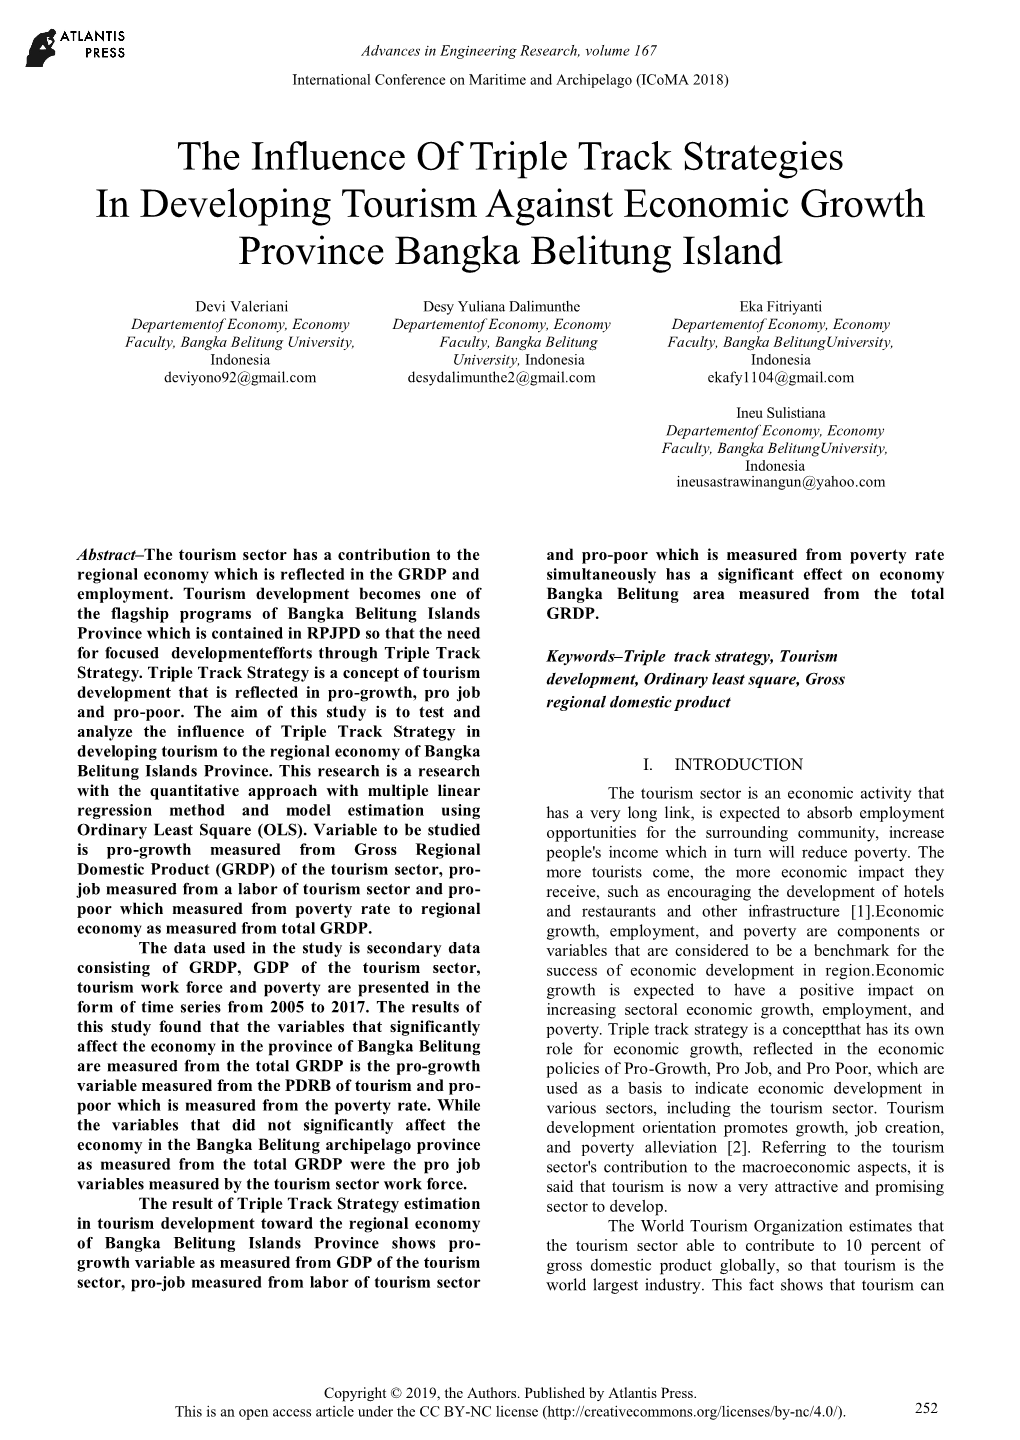 The Influence of Triple Track Strategies in Developing Tourism Against Economic Growth Province Bangka Belitung Island